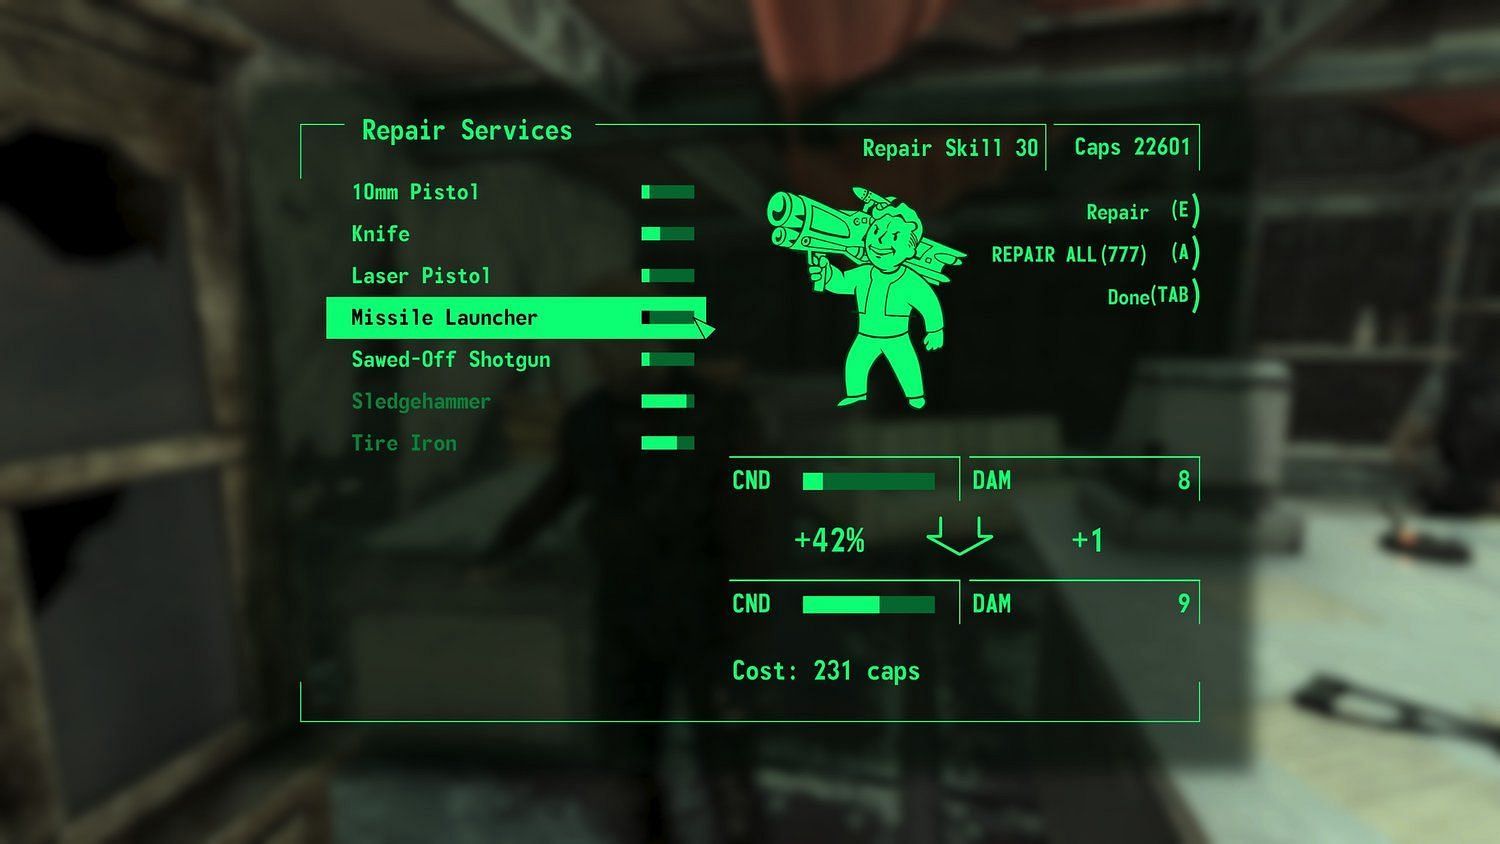 Capital Wasteland looks a lot like Fallout 3 in Fallout 4